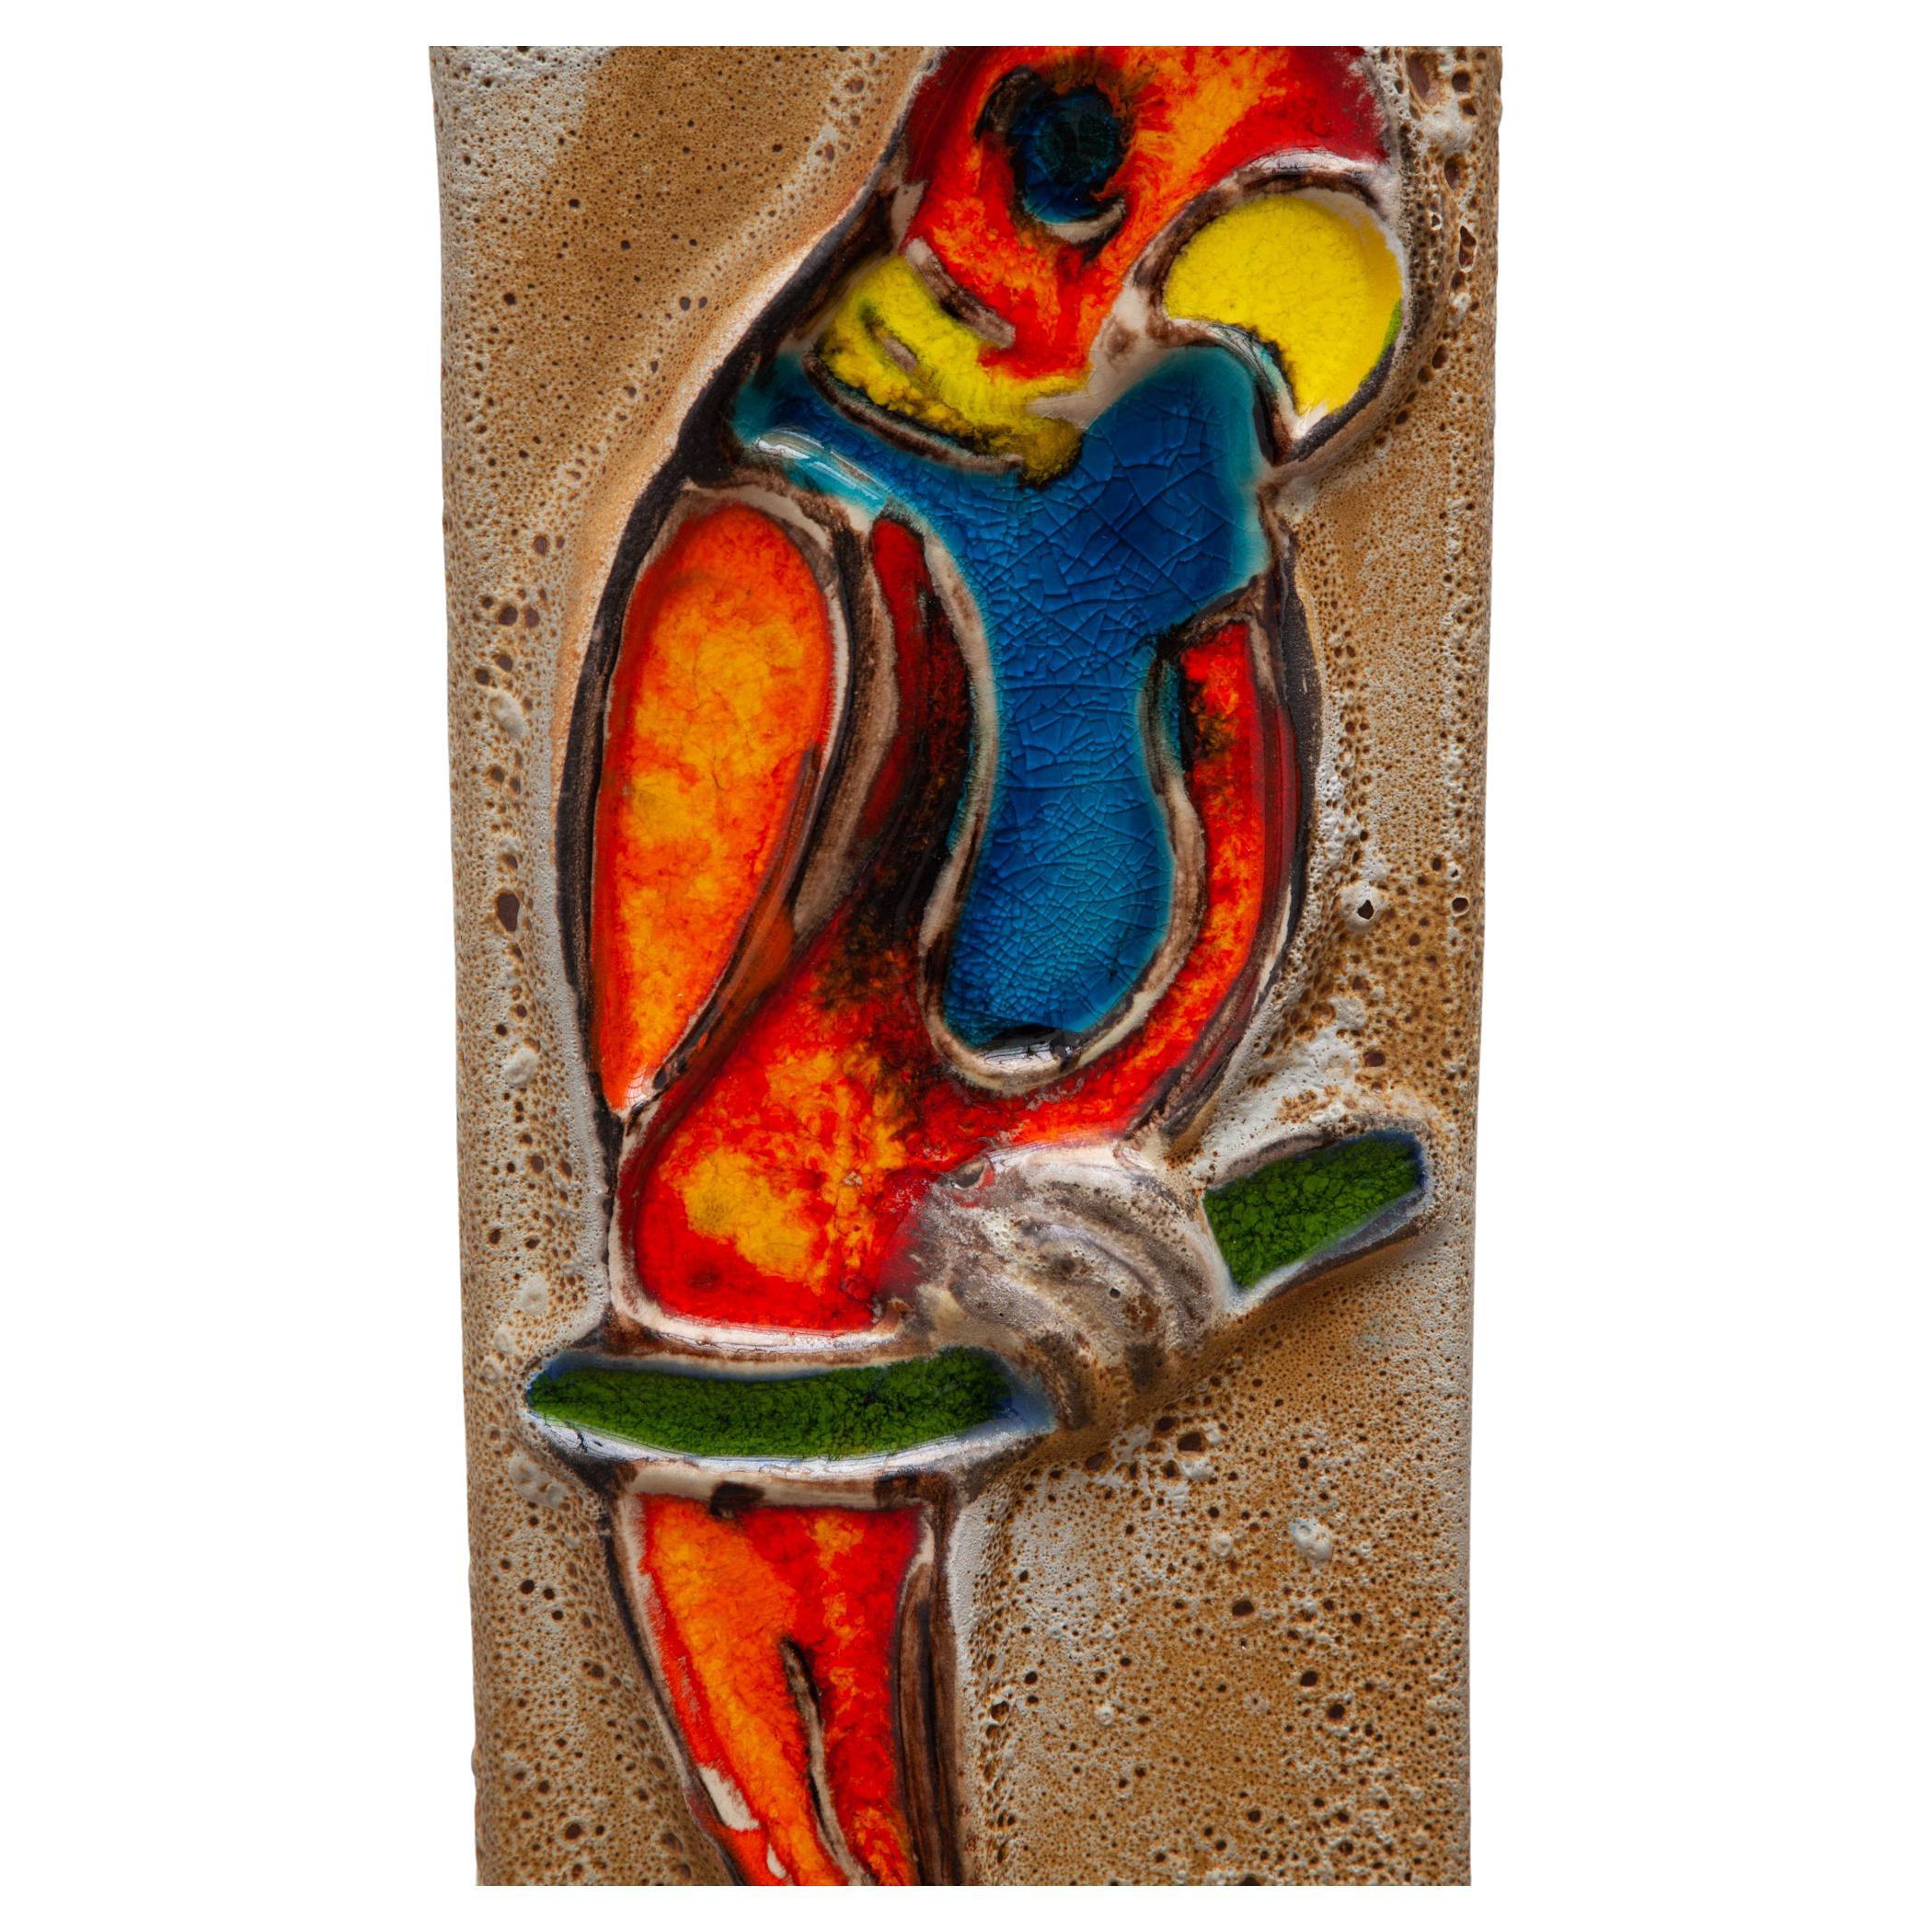 Vintage ceramic glazed wall hanging tile. Relief design of a parrot in colorful glazes and high gloss. Hangs from an iron chain. Dimensions: 20W x 47H x 2D Chain: 28cm.